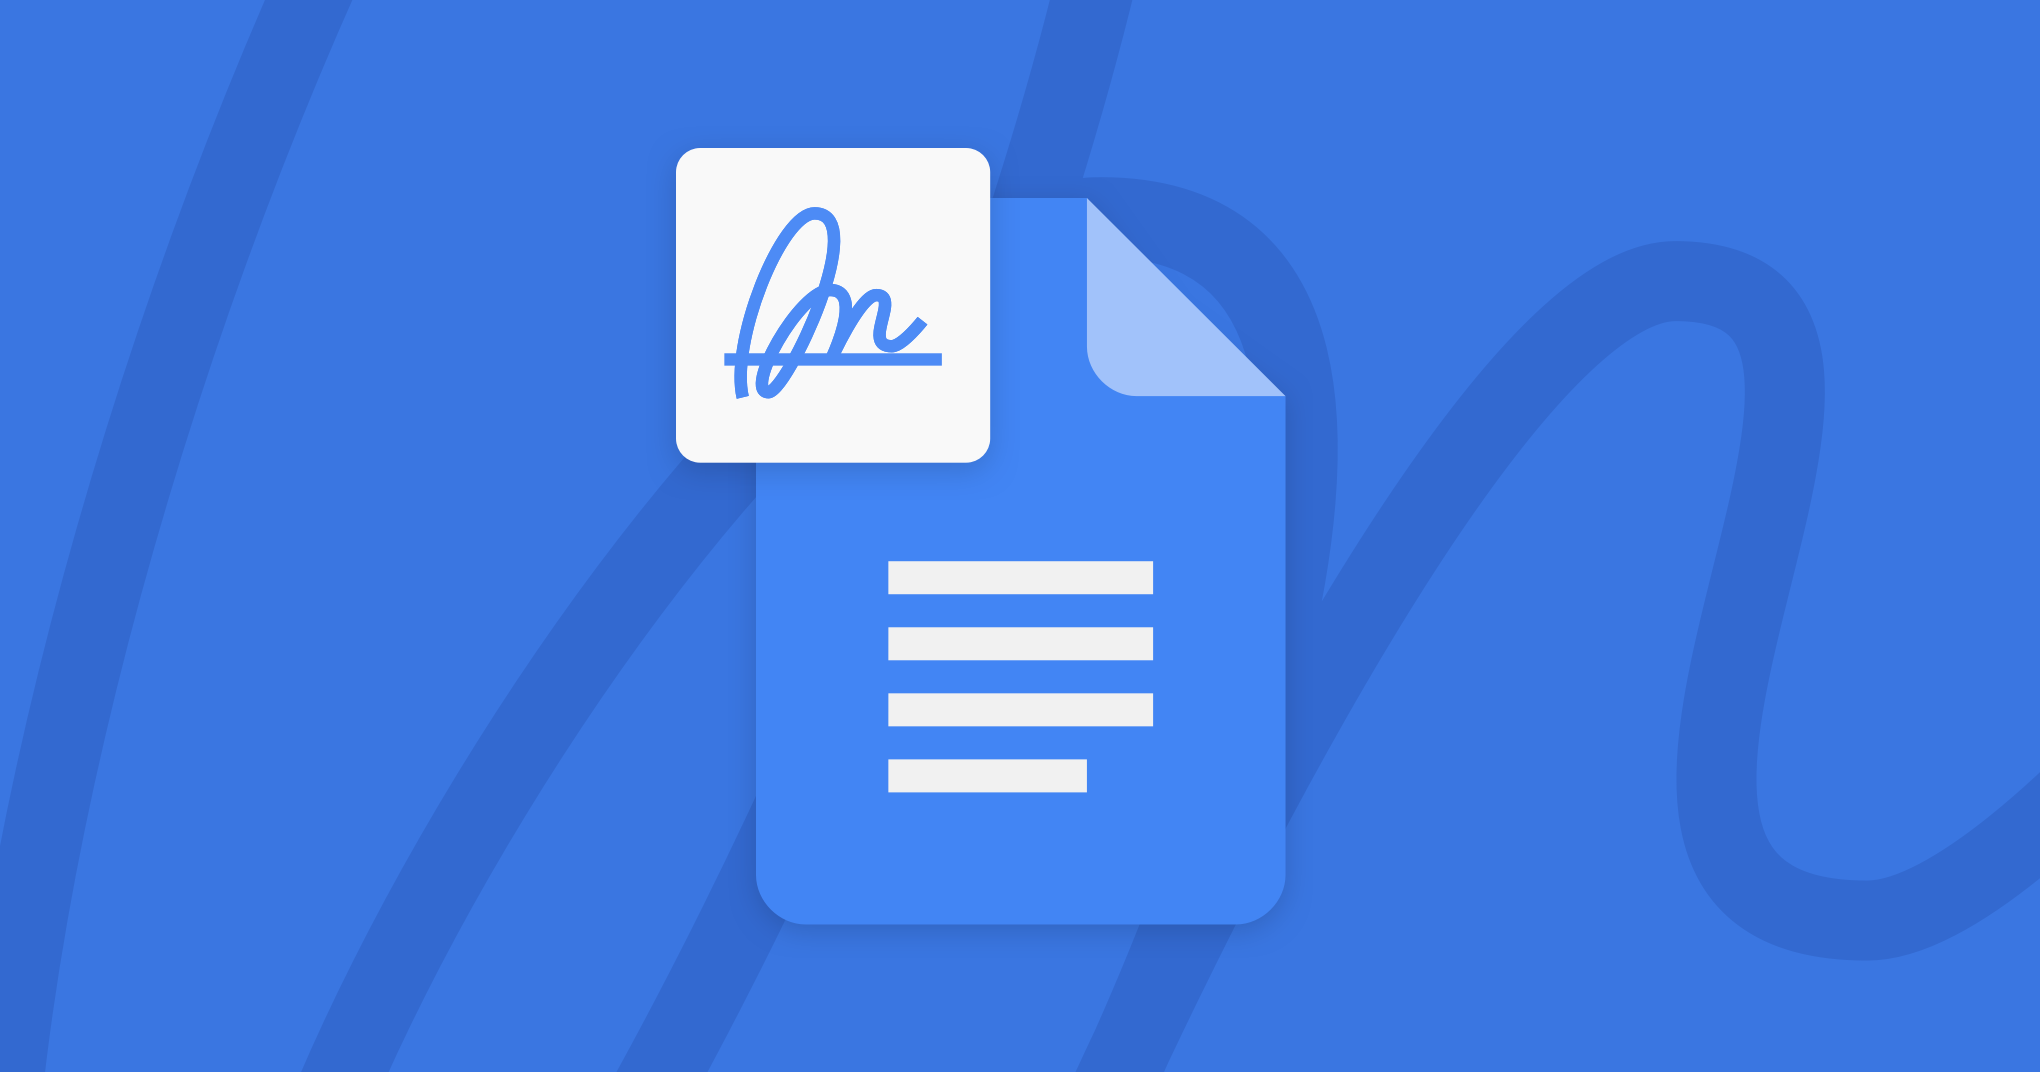 You can now use an electronic signature in a Google Doc